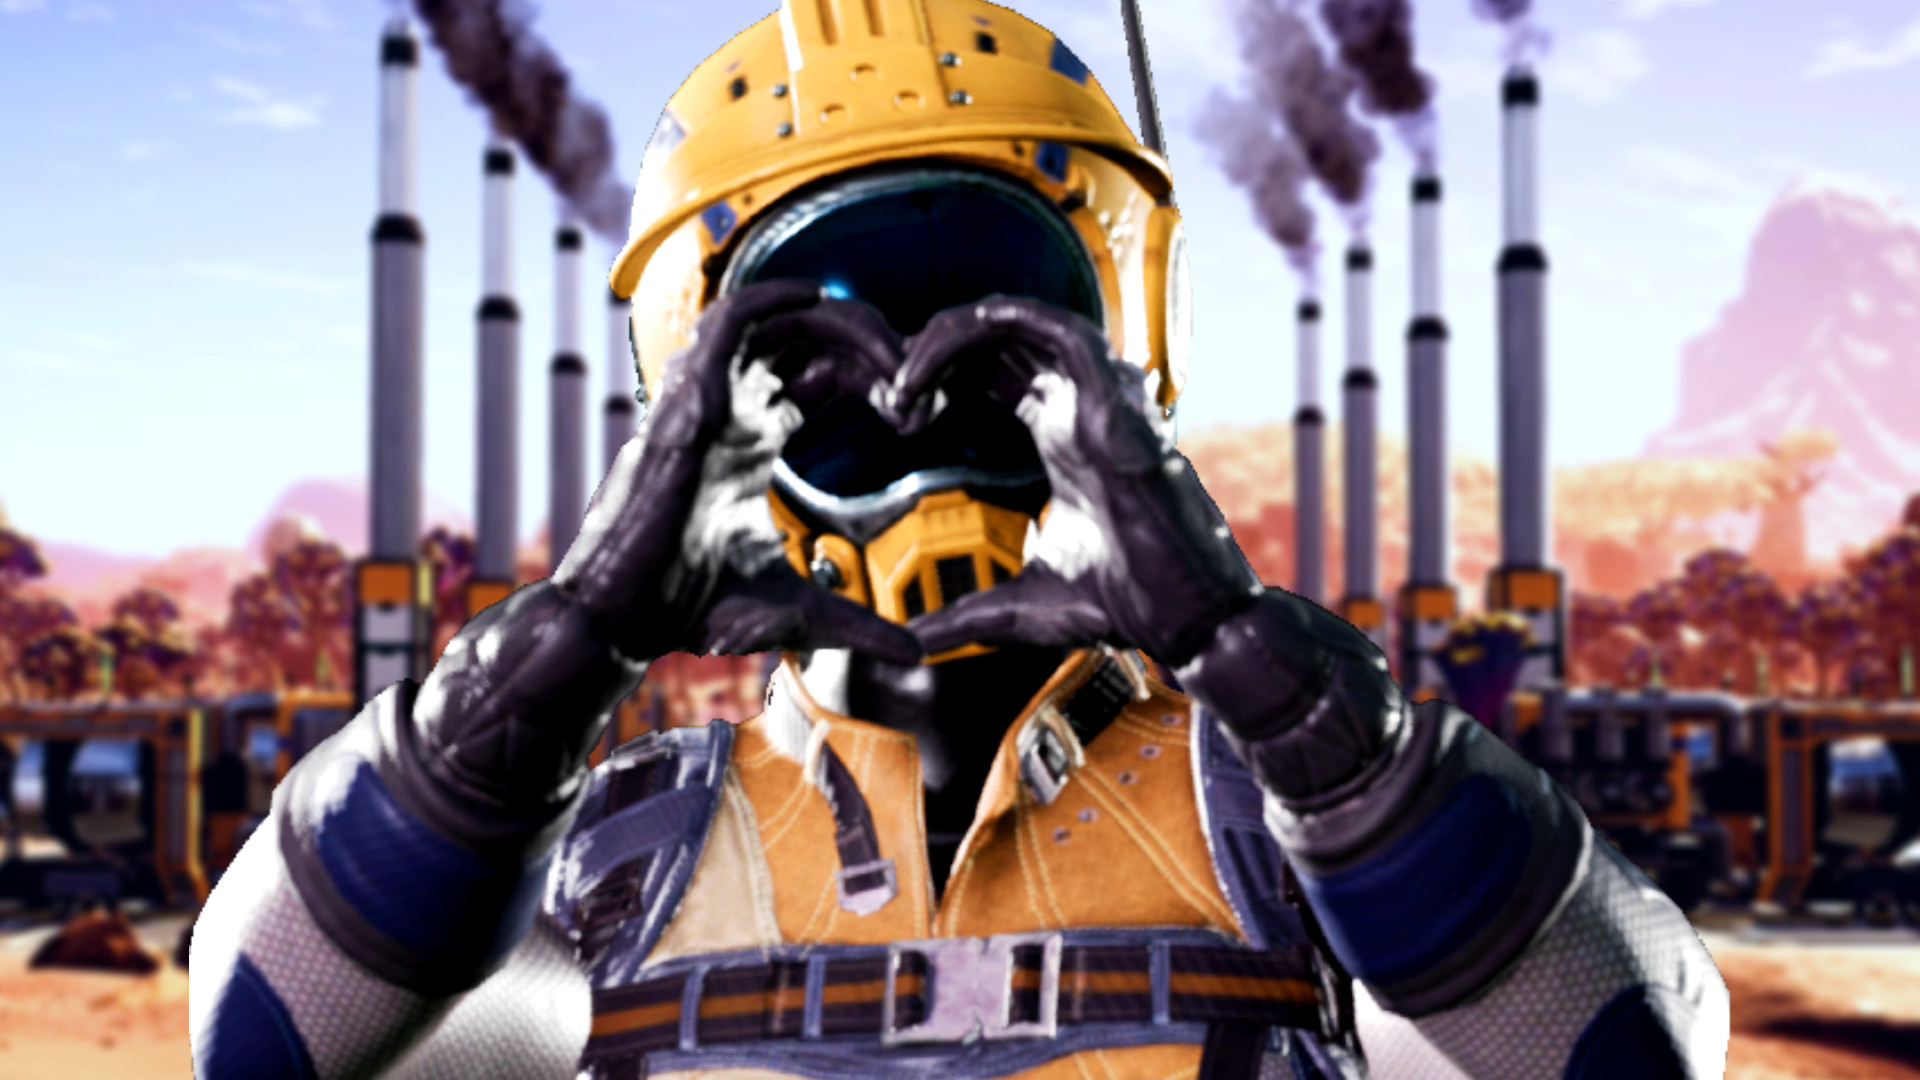 Satisfactory is about to go up in price, but you can grab it cheap now